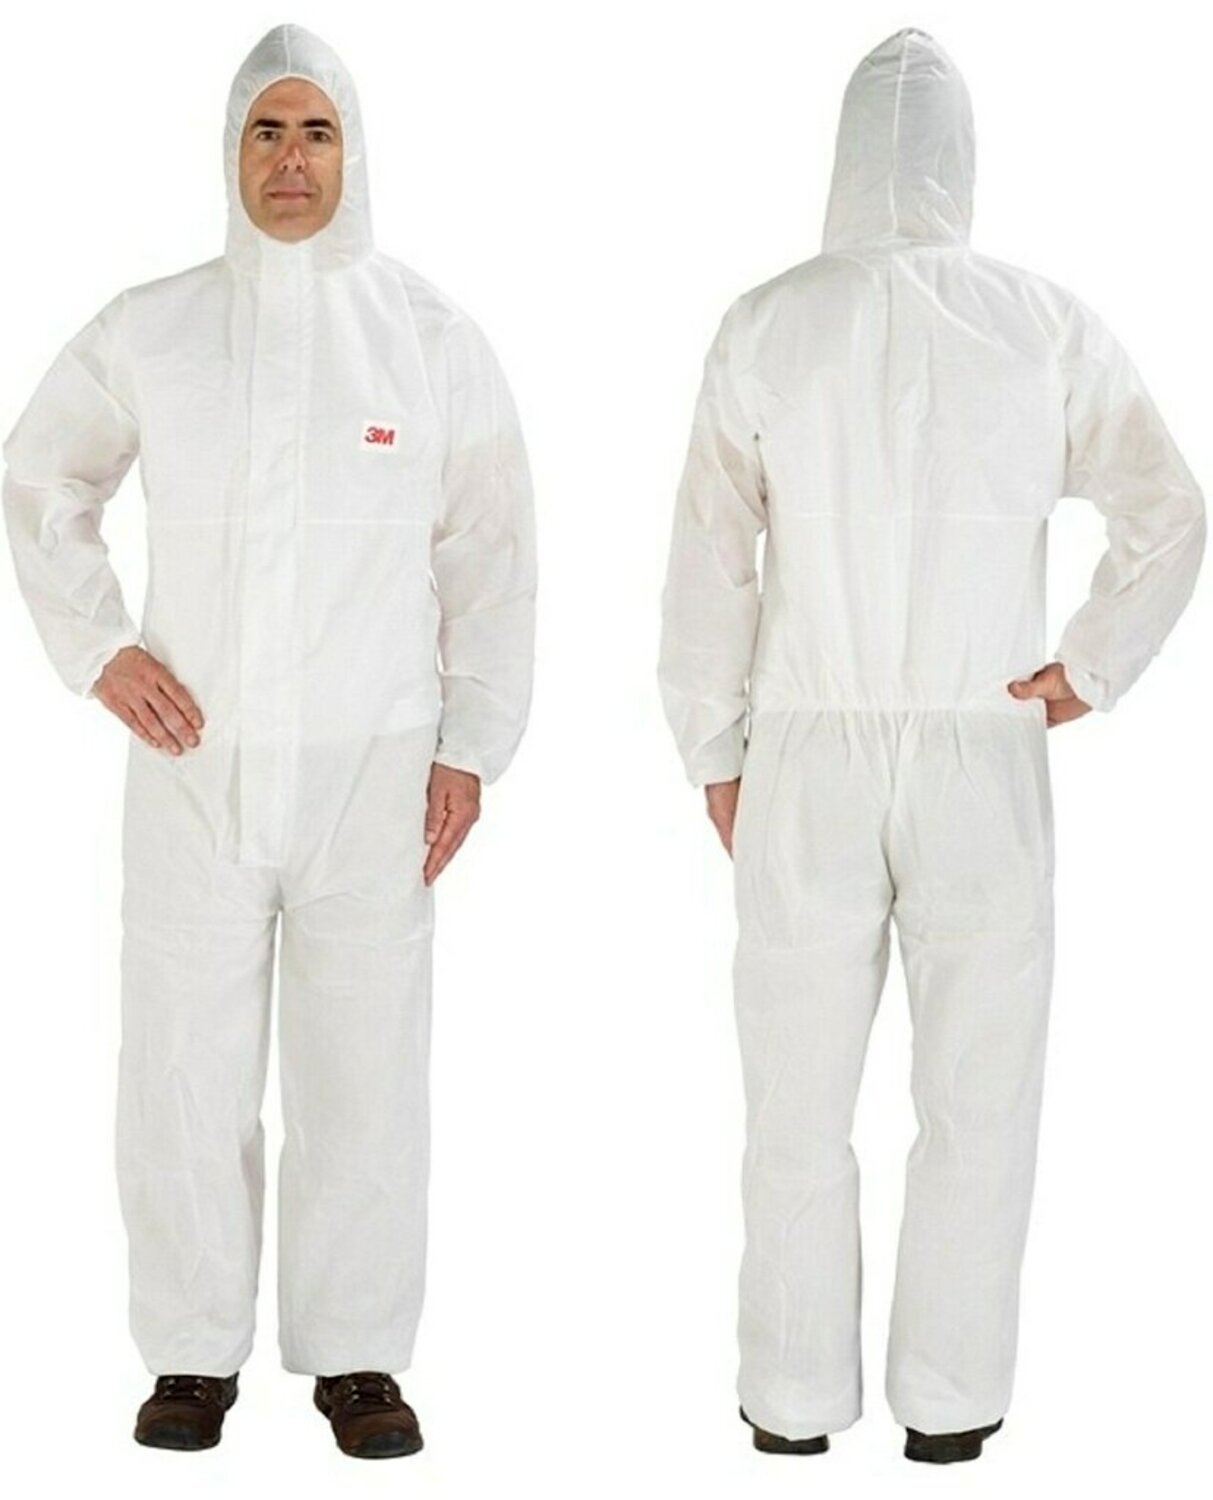 7000089612 - 3M Disposable Protective Coverall 4515-M, White, Type 5/6, 20 ea/Case